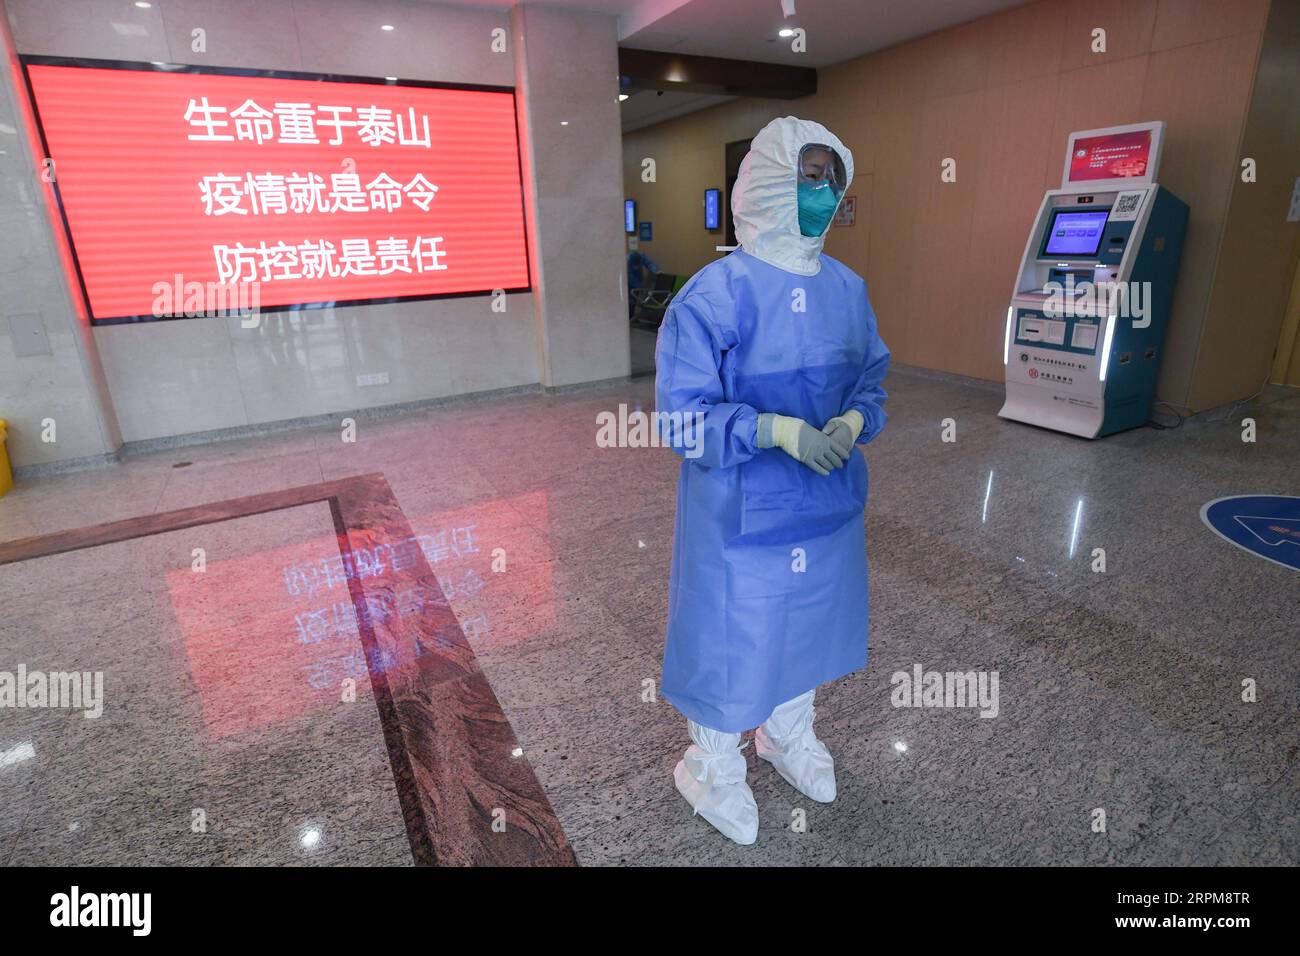 200203 -- HANGZHOU, Feb. 3, 2020 -- A nurse prepares to receive patients at the fever clinic of the Zhijiang campus of the First Affiliated Hospital of College of Medicine, Zhejiang University, in Hangzhou, capital of east China s Zhejiang Province, Feb. 3, 2020. The Zhijiang campus of the hospital has the capacity of about 1,000 beds and is able to receive nearly 100 patients in severe condition. At present, it has admitted 54 confirmed cases of novel coronavirus infection, including 23 cases in severe condition and 8 cases in critical condition. The condition of 23 out of 54 cases have turne Stock Photo